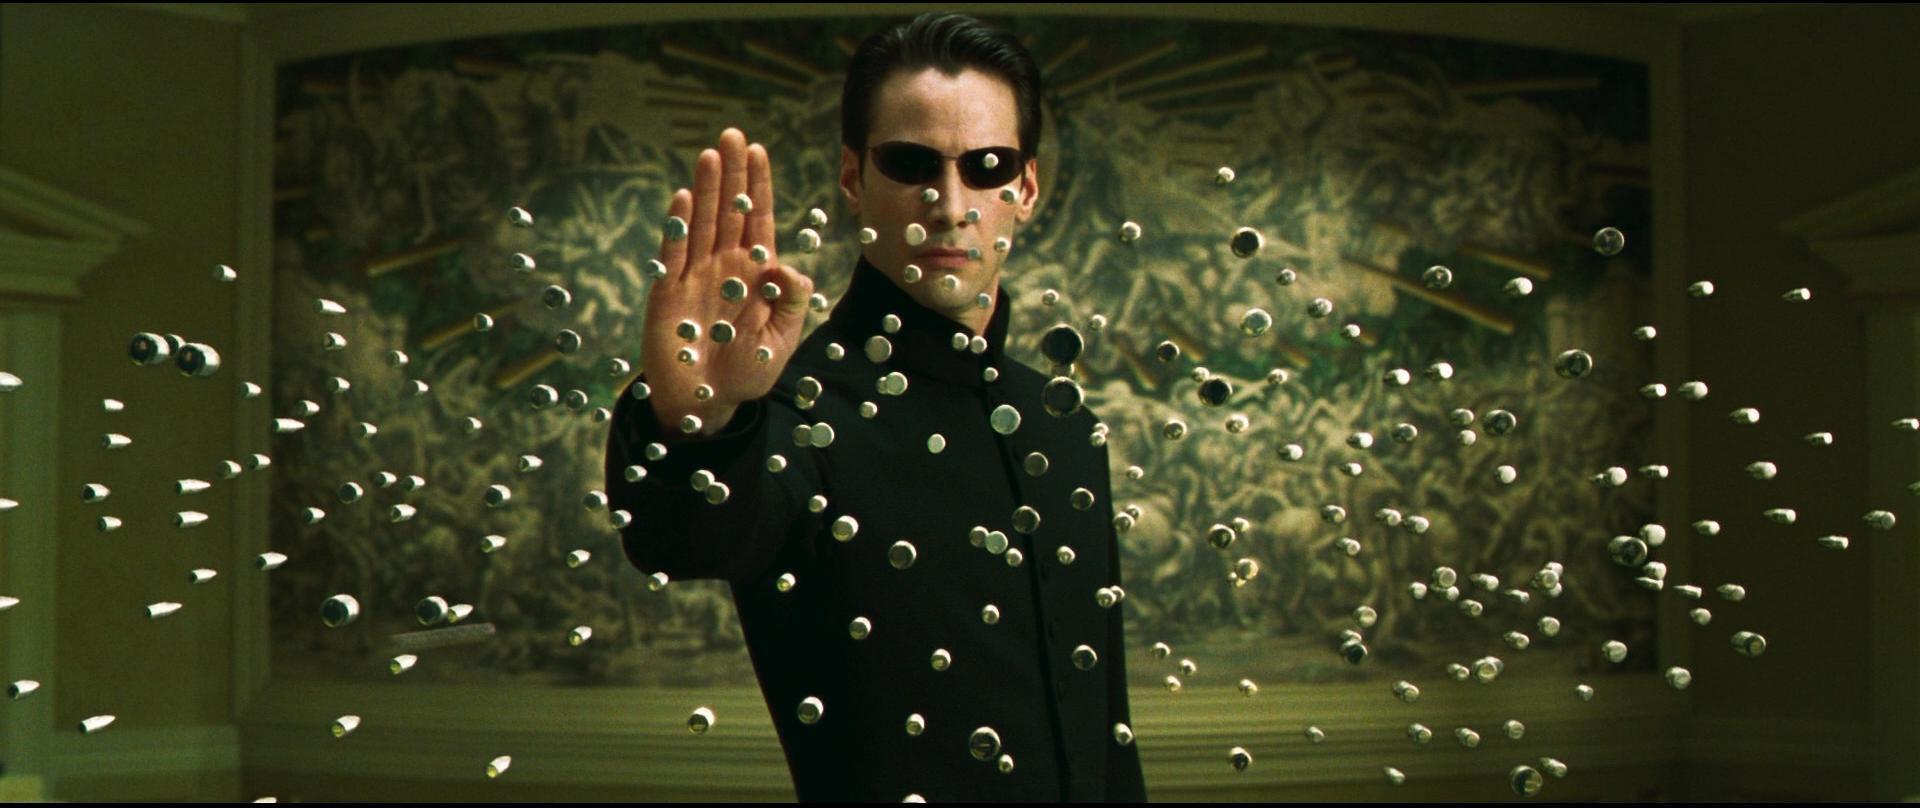 Image Gallery For The Matrix Reloaded Filmaffinity